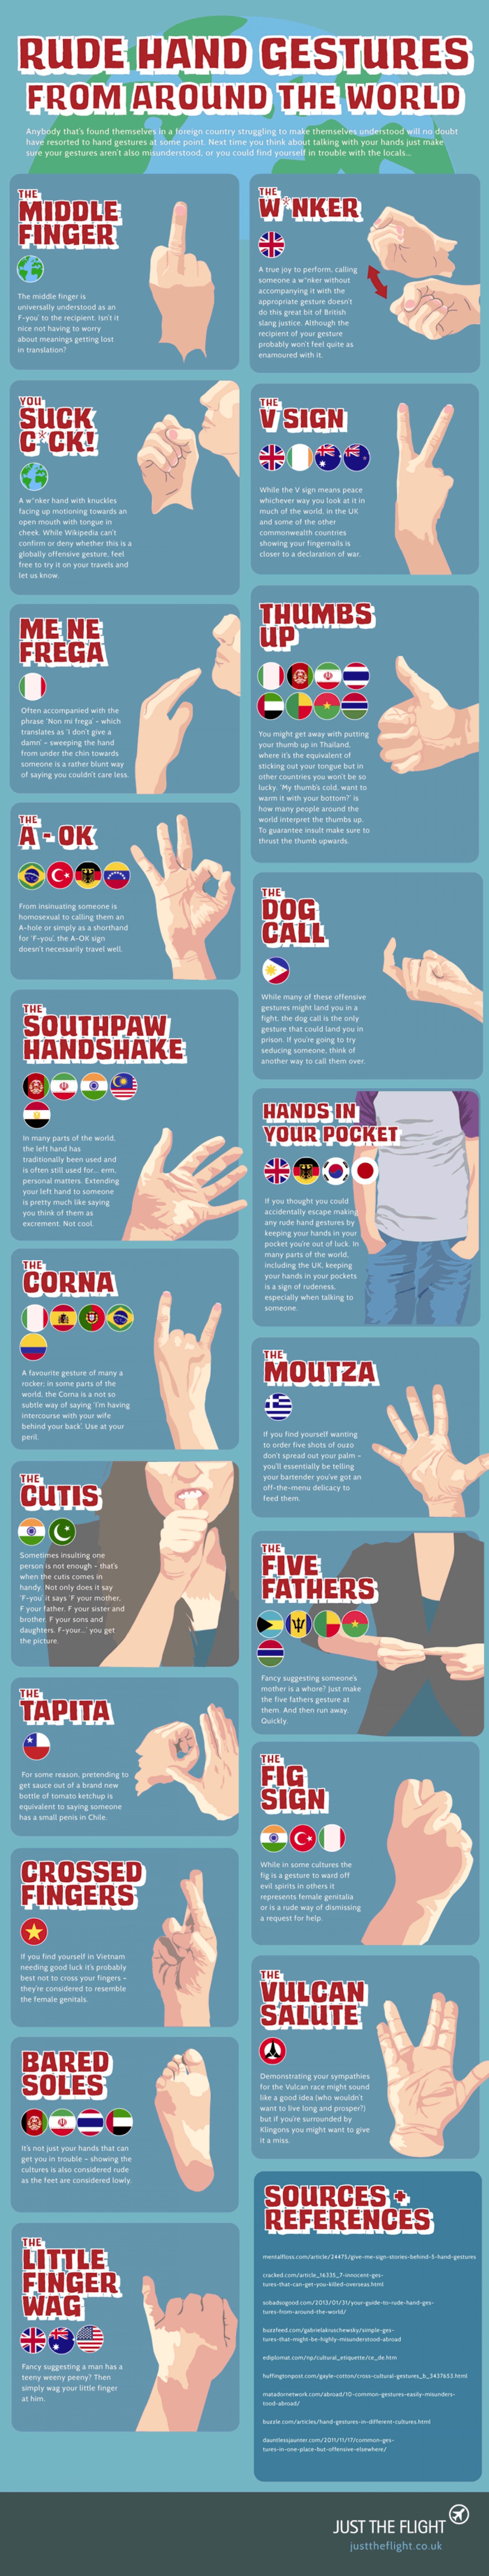 rude-hand-gestures-from-around-the-world_533926556232e_w1500.png